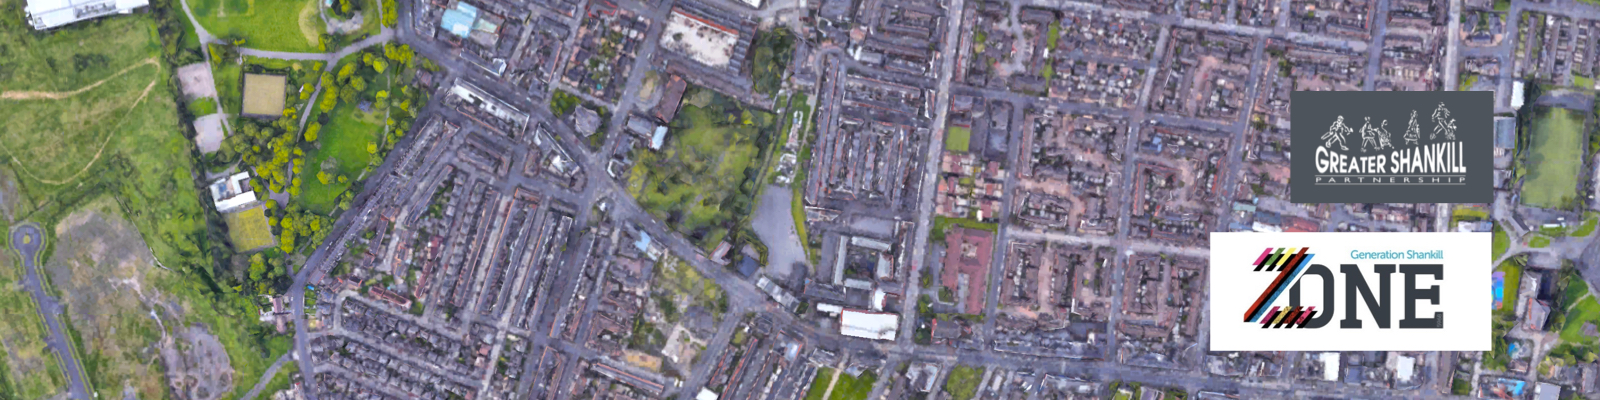 Aerial view of the Shankill area